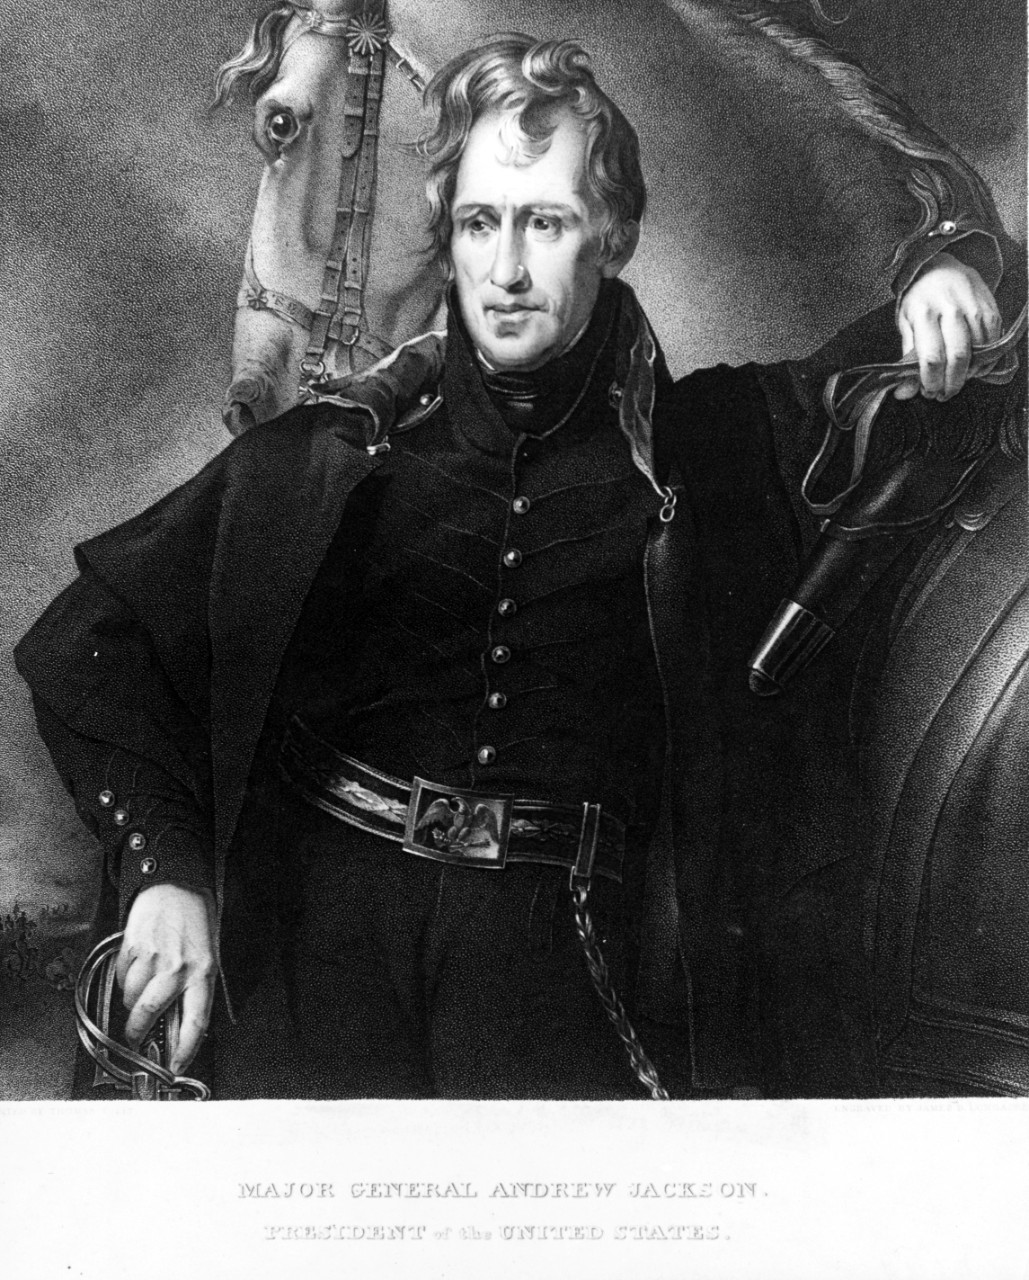 Andrew Jackson (1767-1845), American General and President